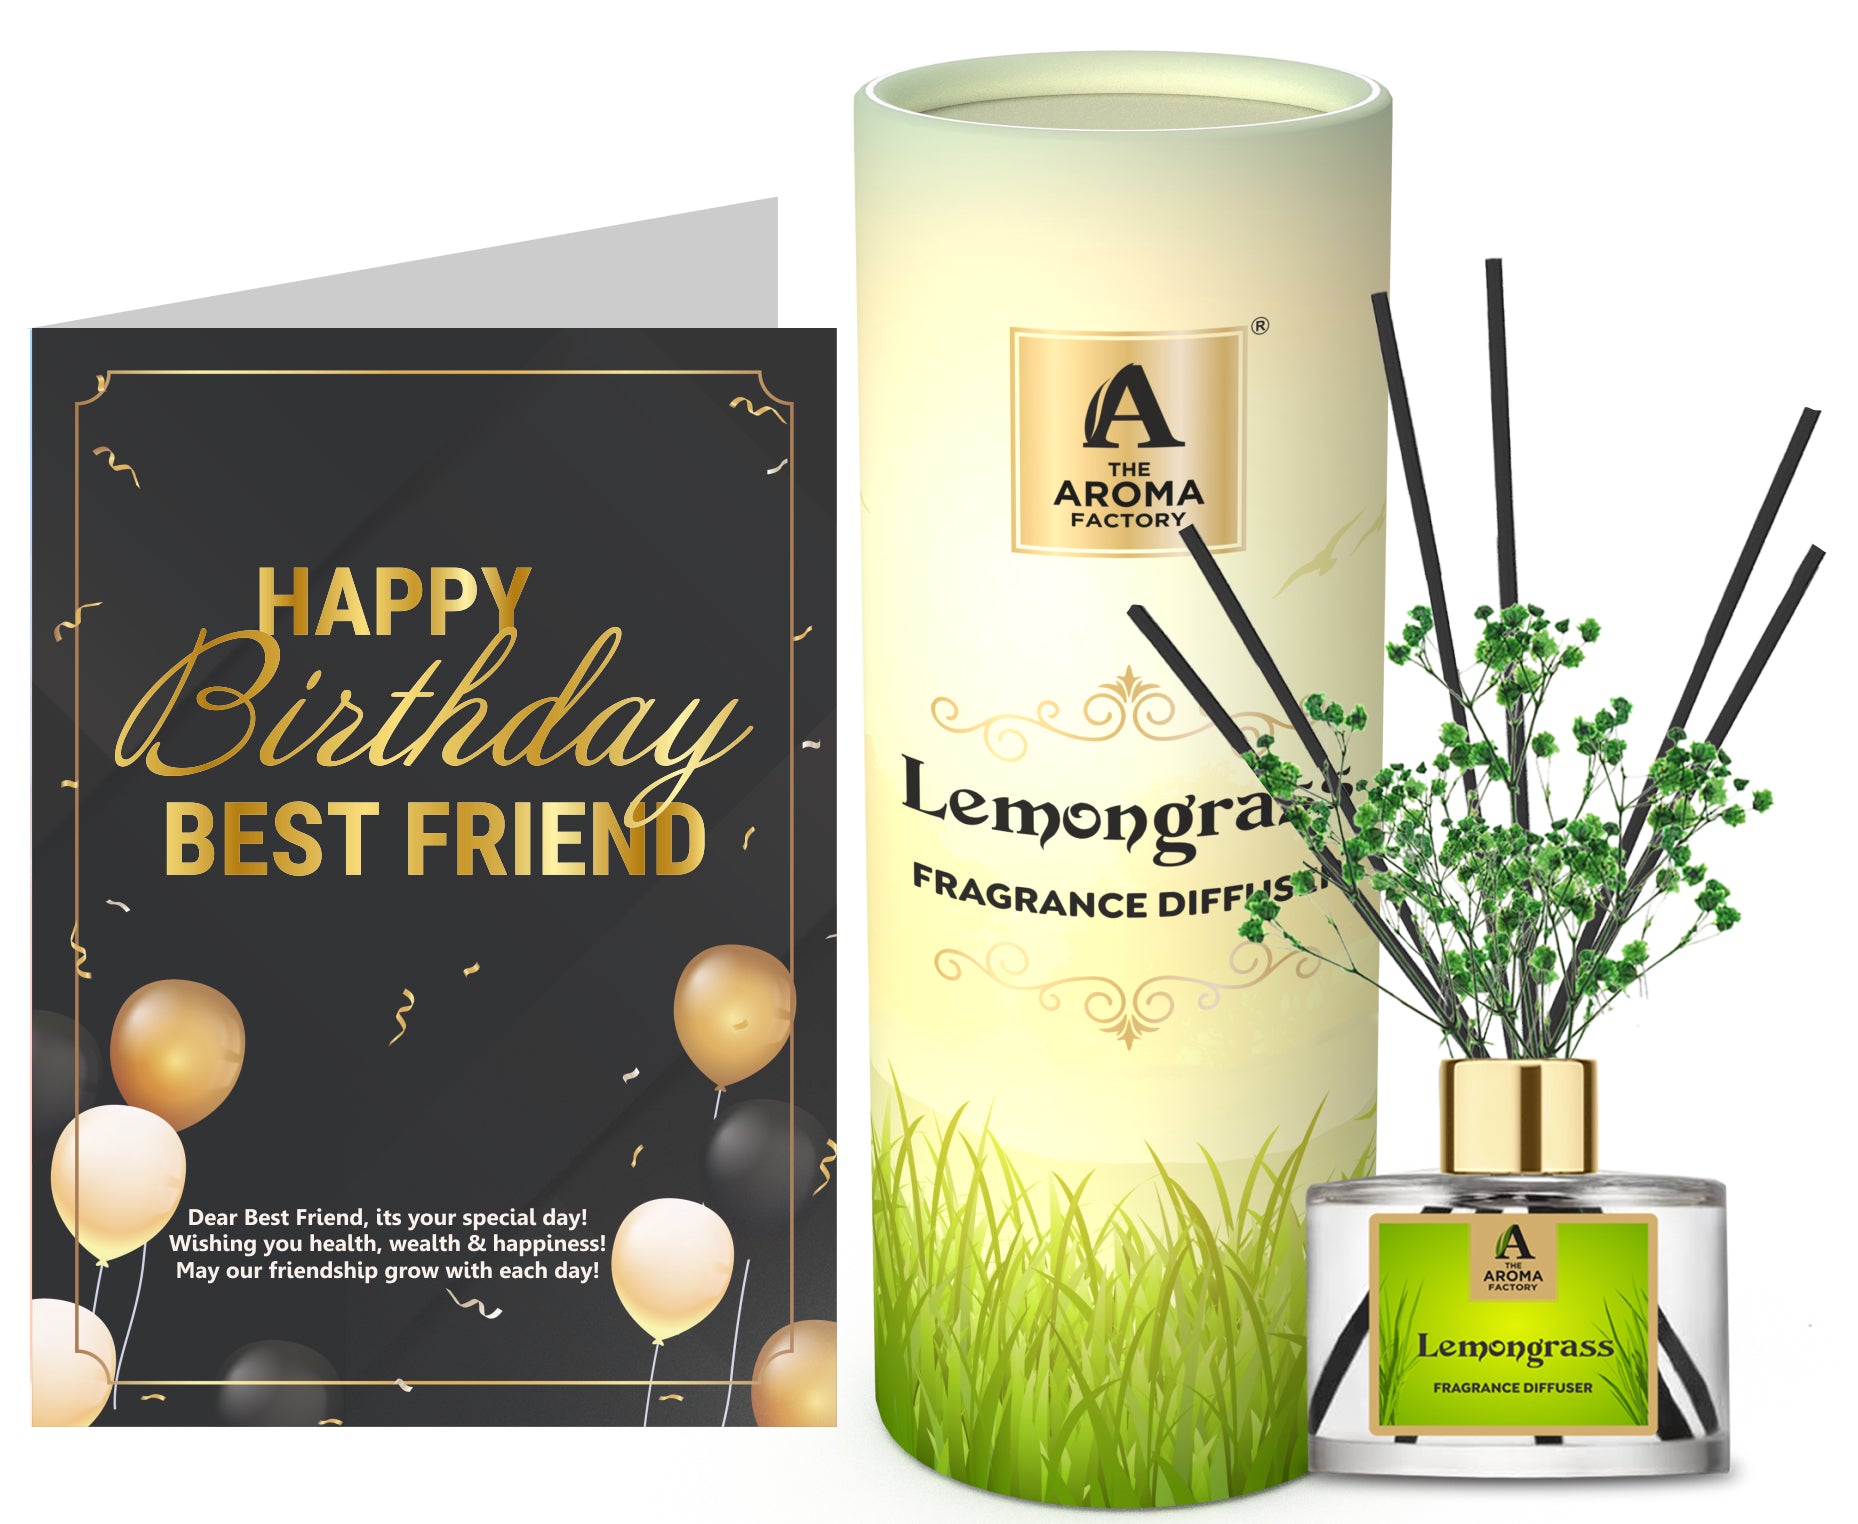 The Aroma Factory Happy Birthday with Card, Lemongrass Fragrance Reed Diffuser Set (1 Box + 1 Card)